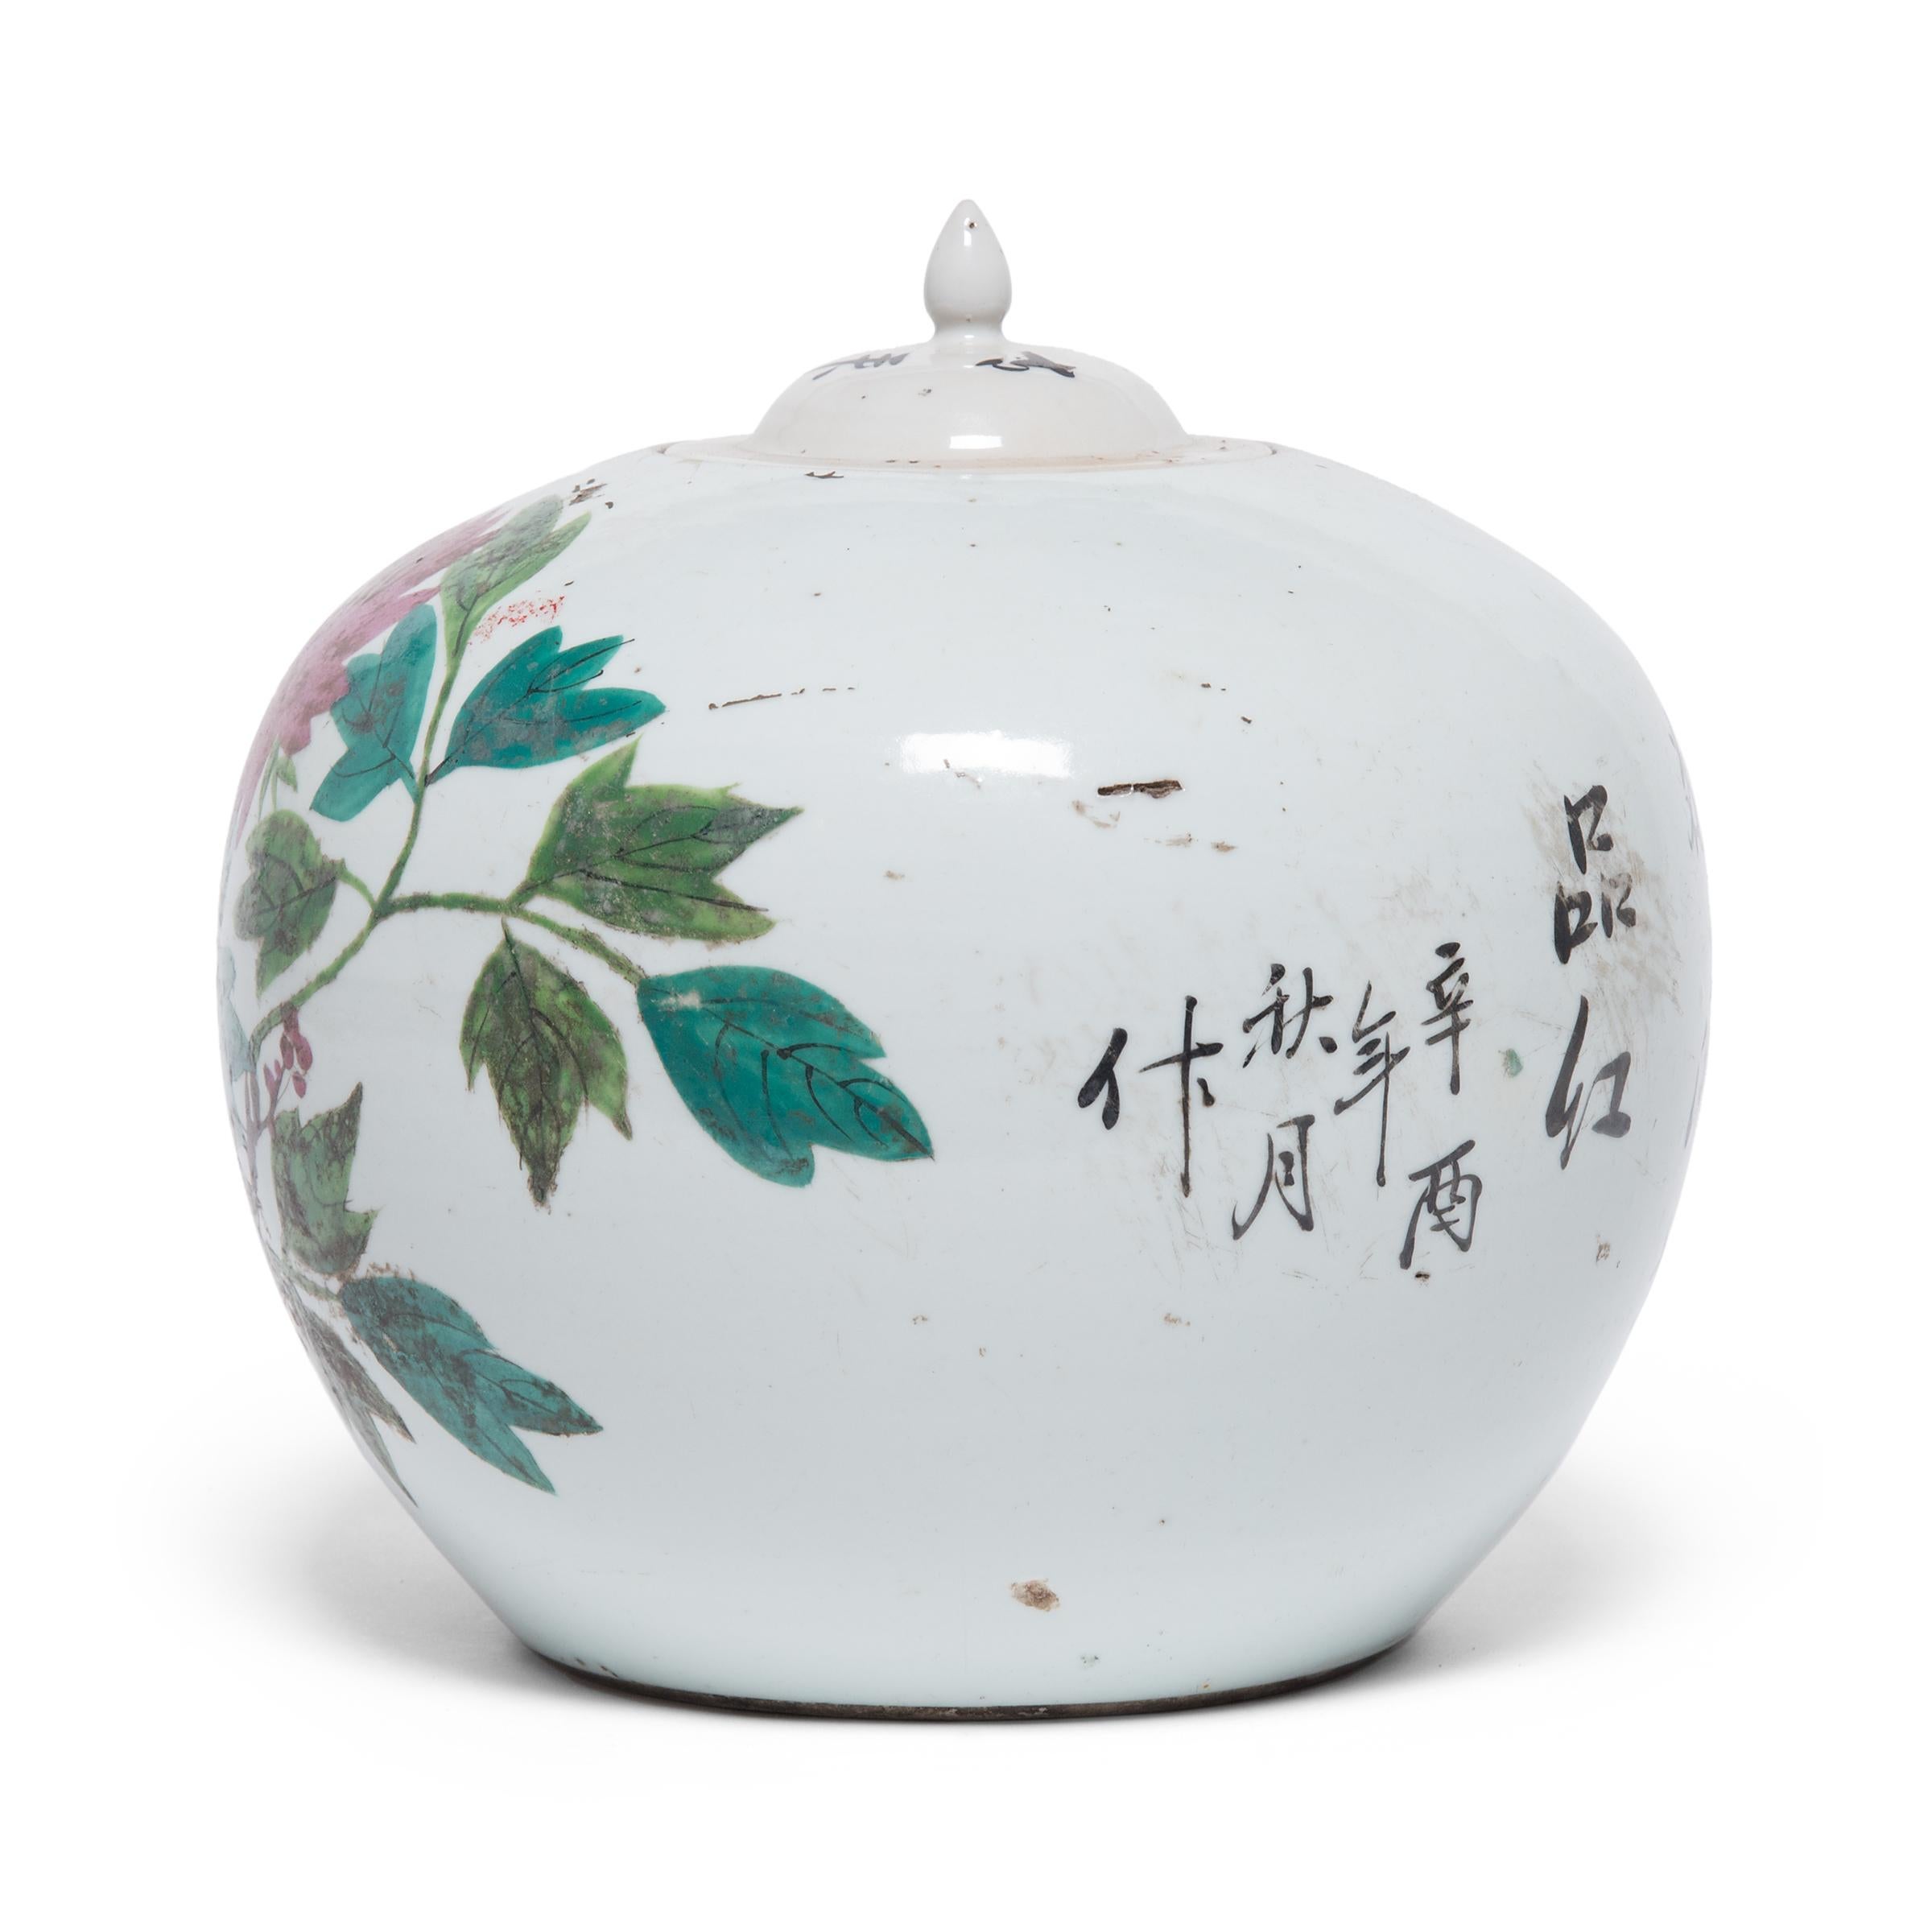 This ginger jar dates to the early 20th century and features rounded sides and high shoulders that curve in towards a narrow mouth. Painted with expressive brushwork in a palette of pinks, blues, and greens, the jar is festooned with peony blossoms,